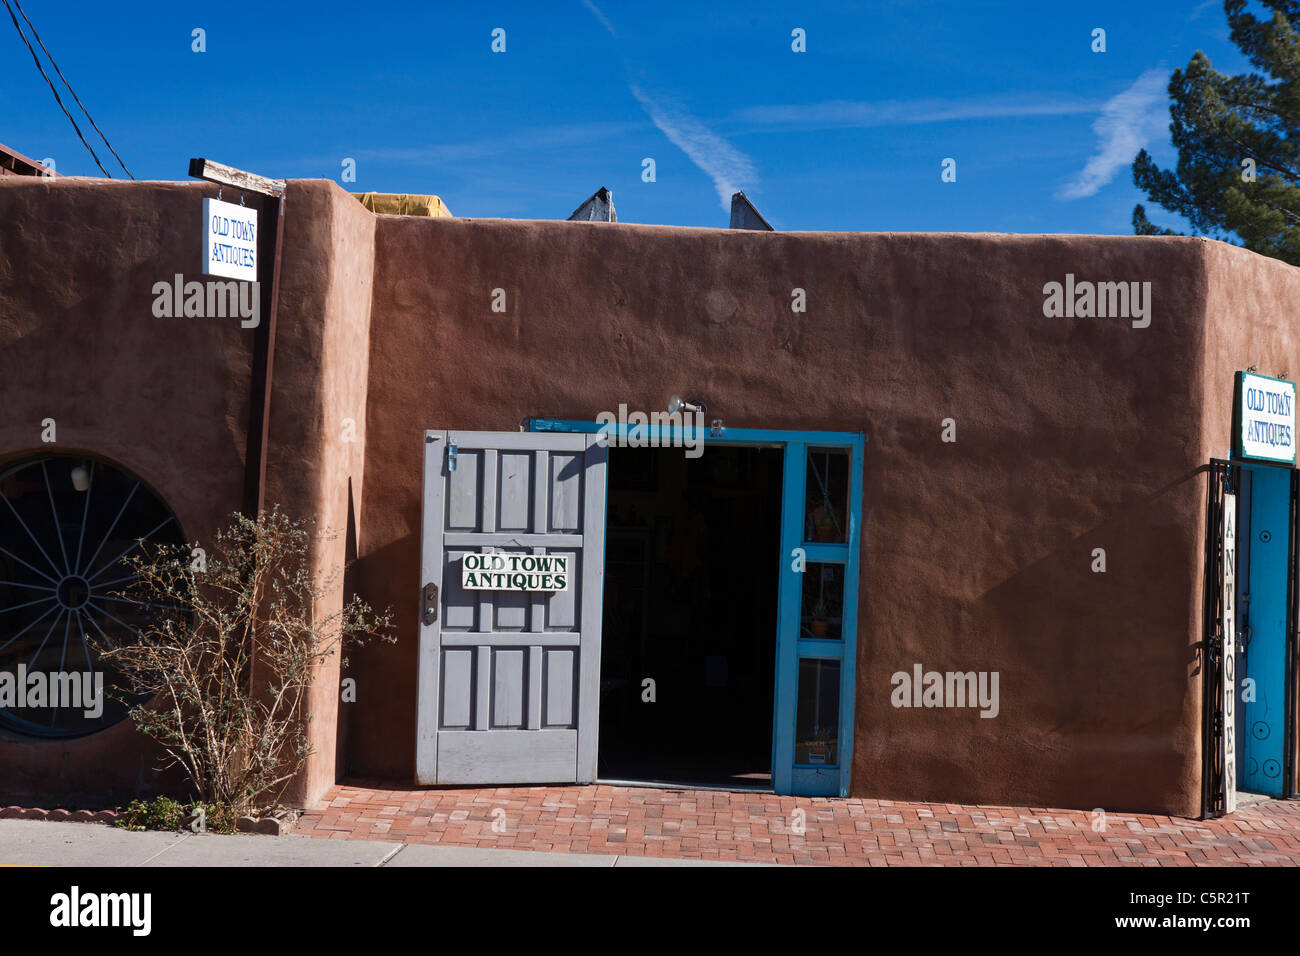 Adobe style building for Old Town Antiques store, Albuquerque, New Mexico, United States of America Stock Photo